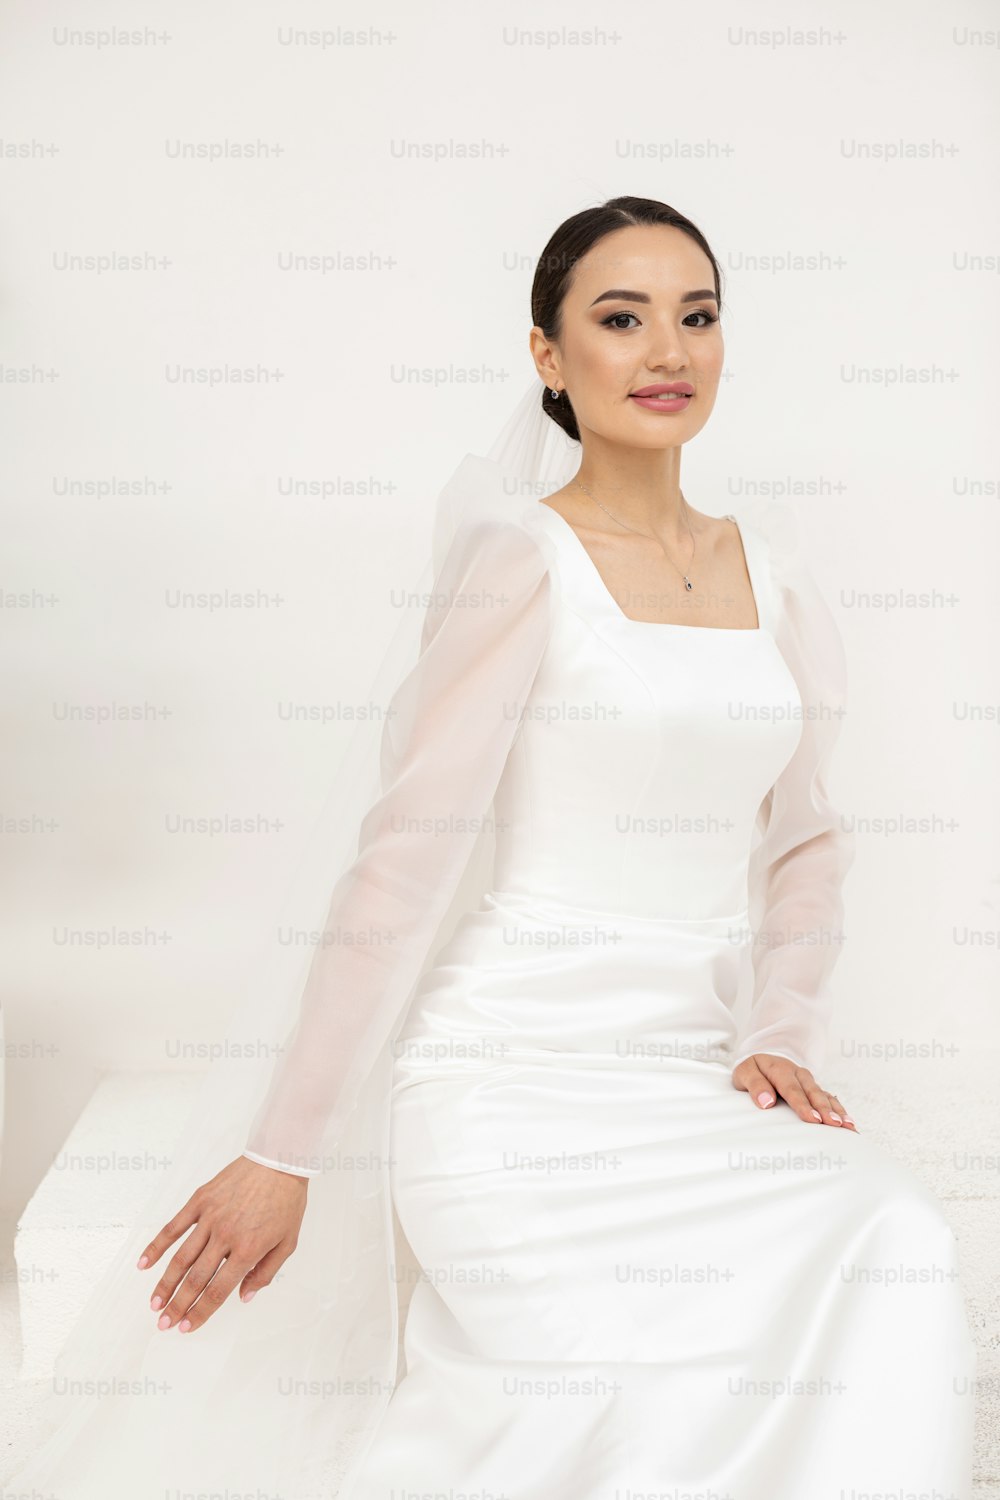 a woman in a white wedding dress posing for a picture